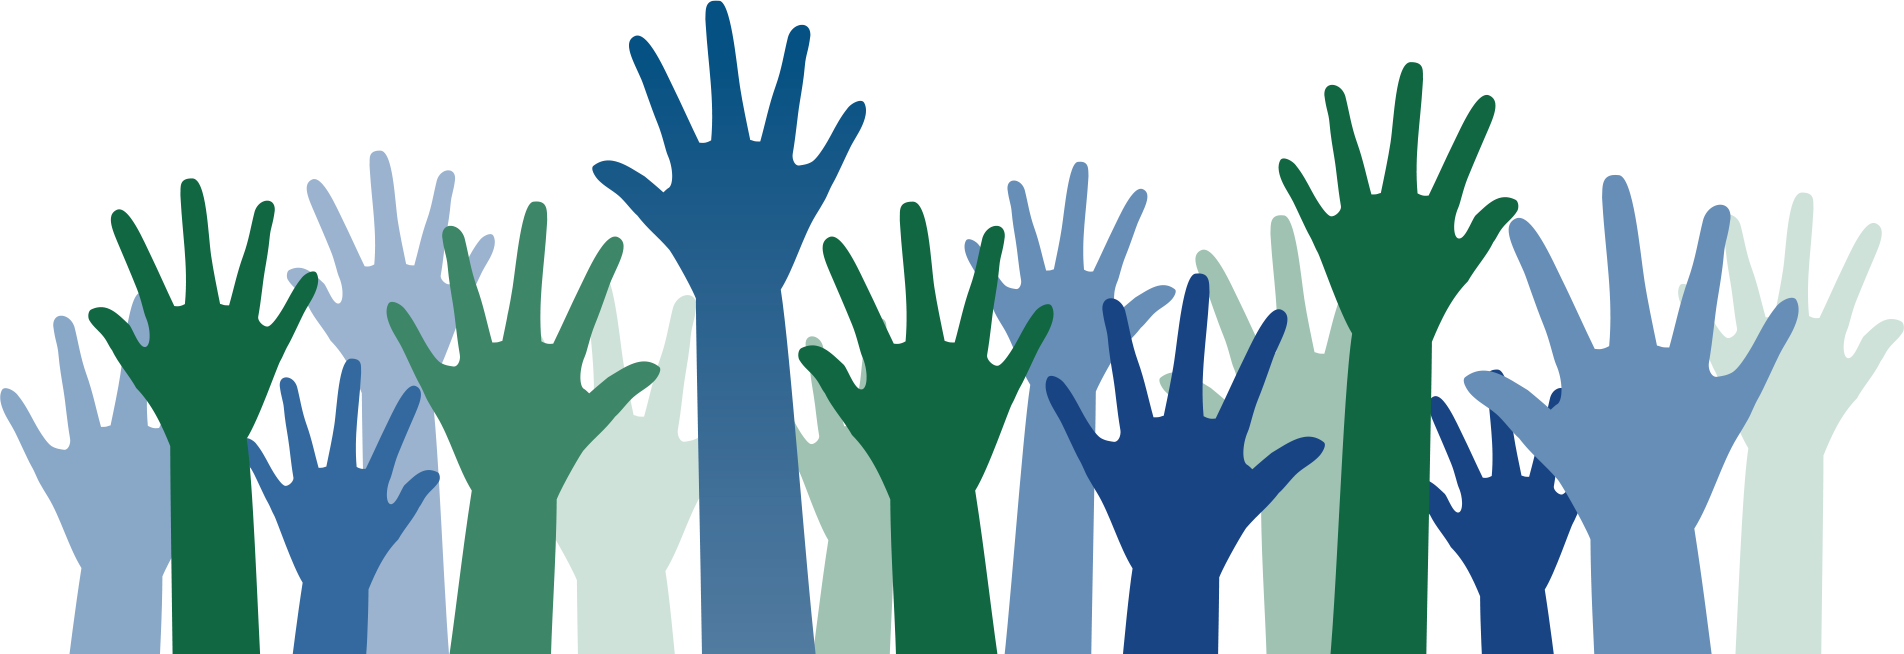 Graphic of several hands raised